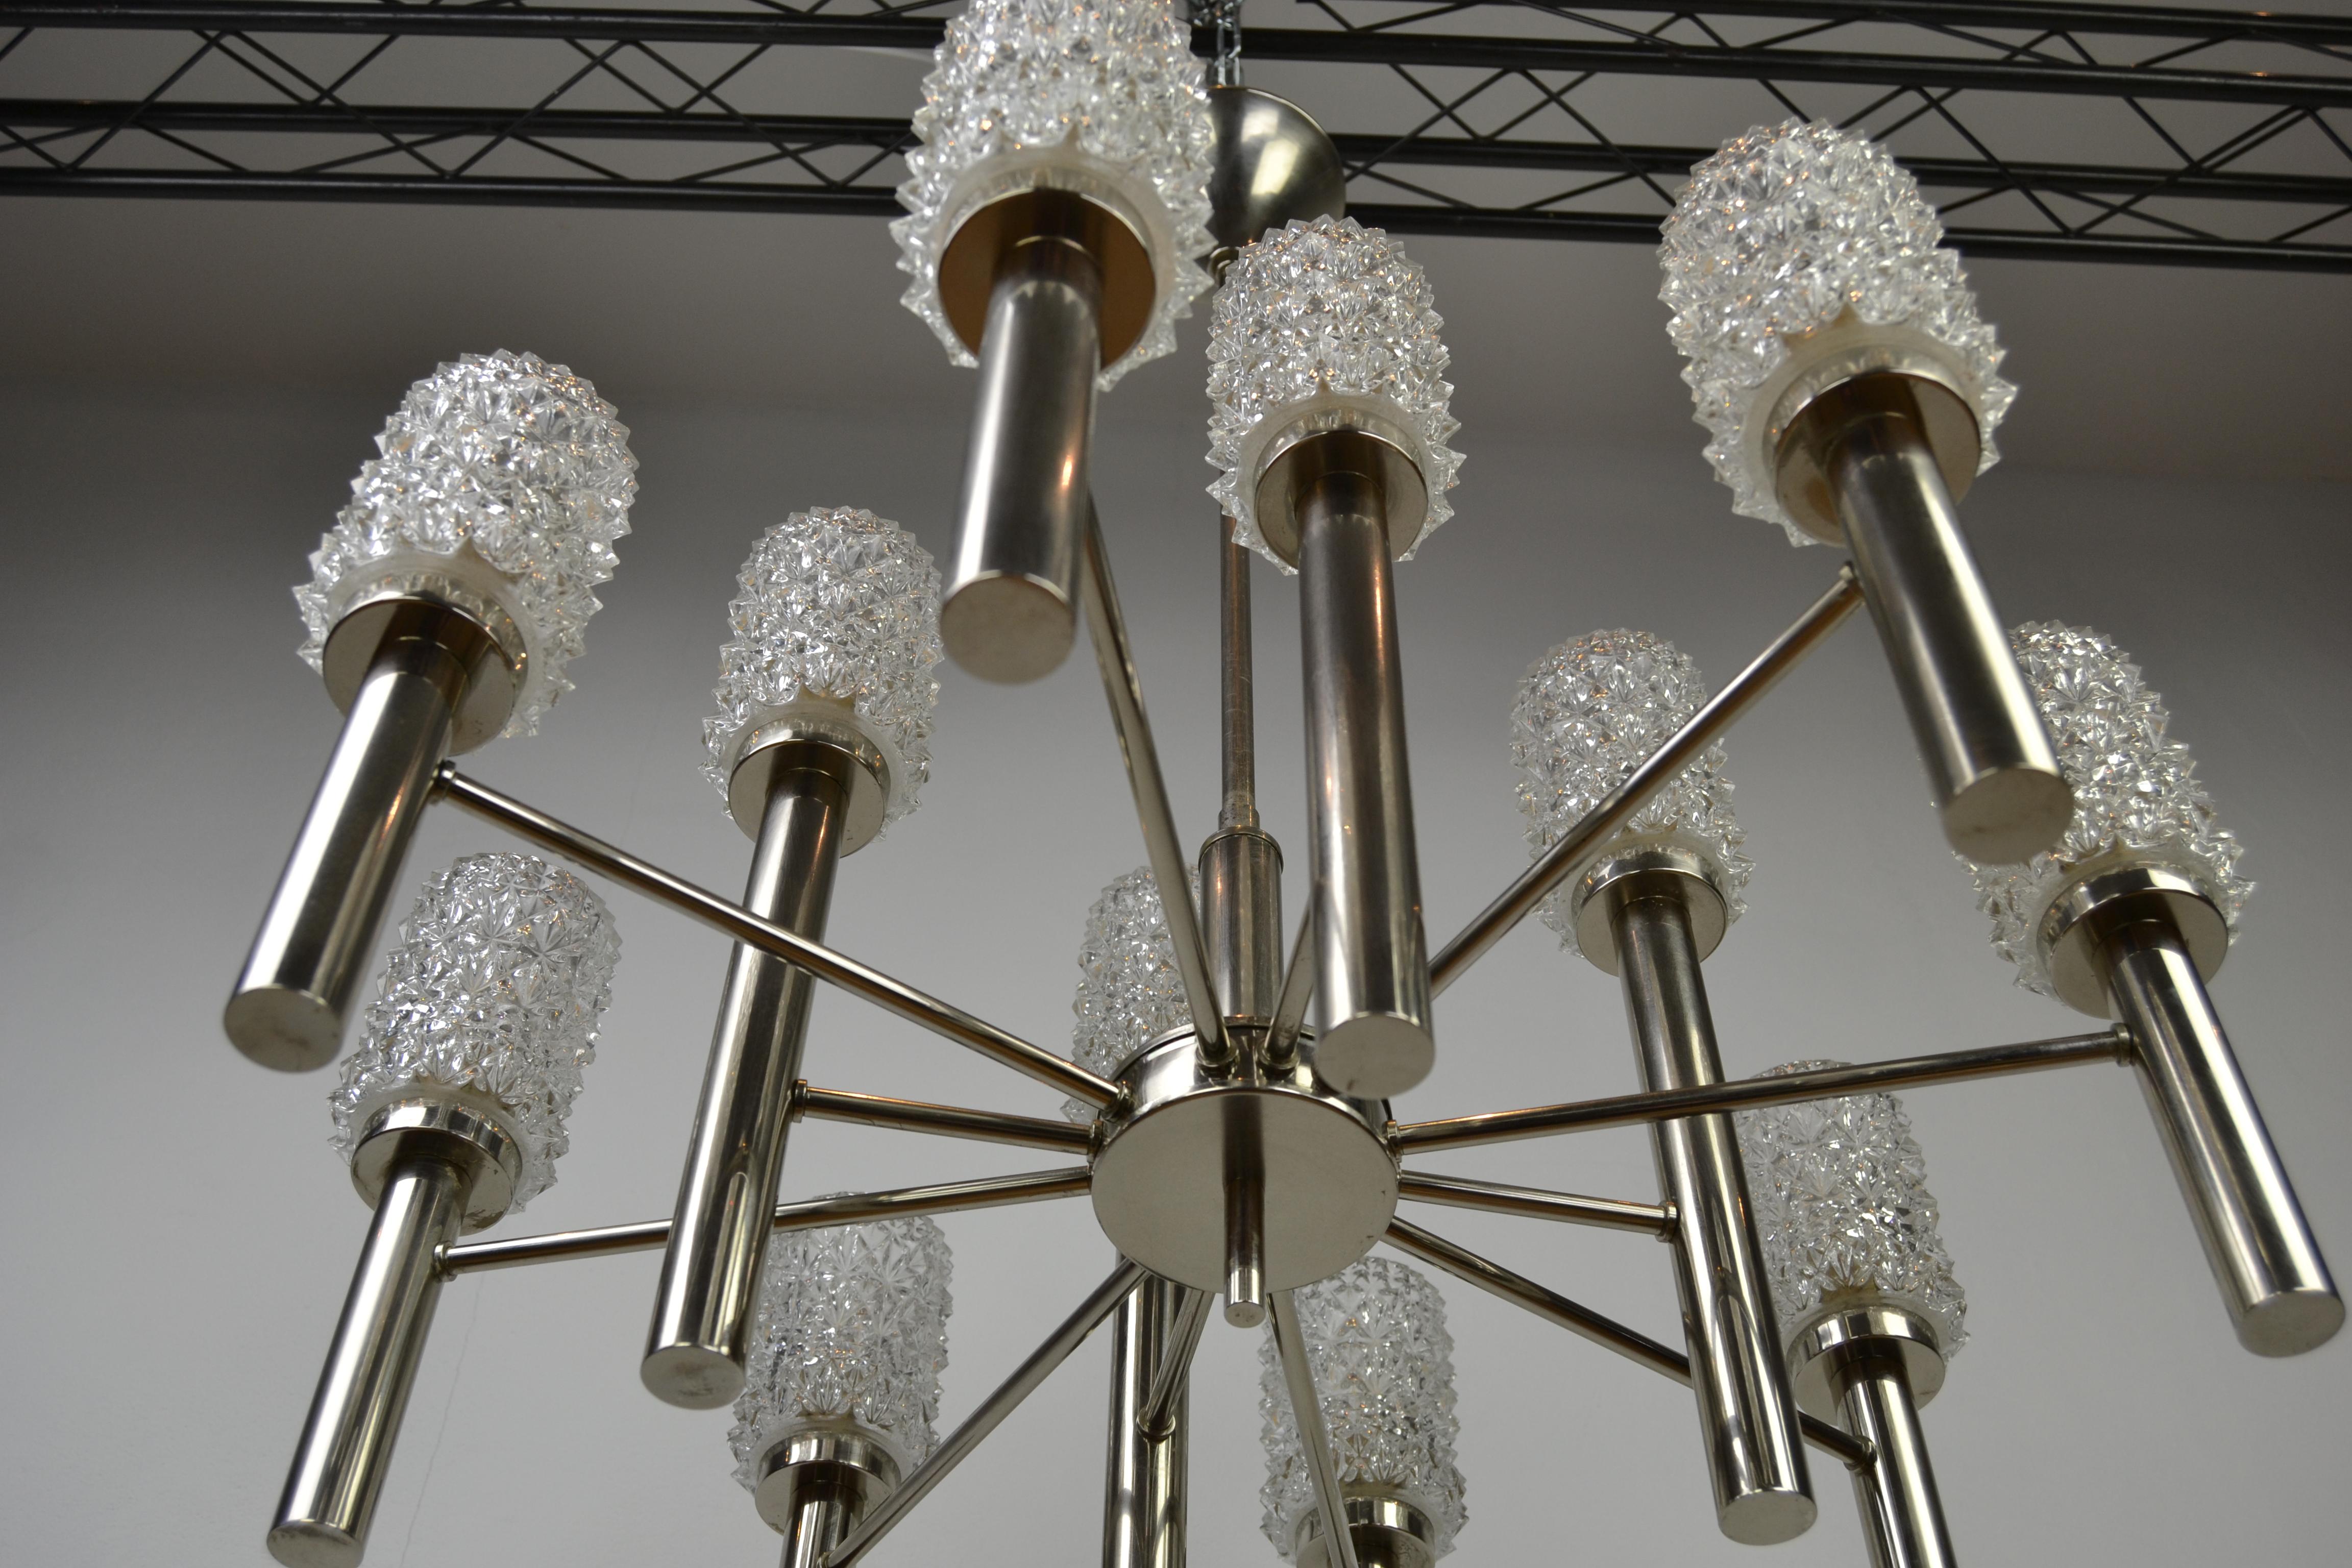 European Mid-20th Century Chrome and Art Glass Chandelier, 12-Armed For Sale